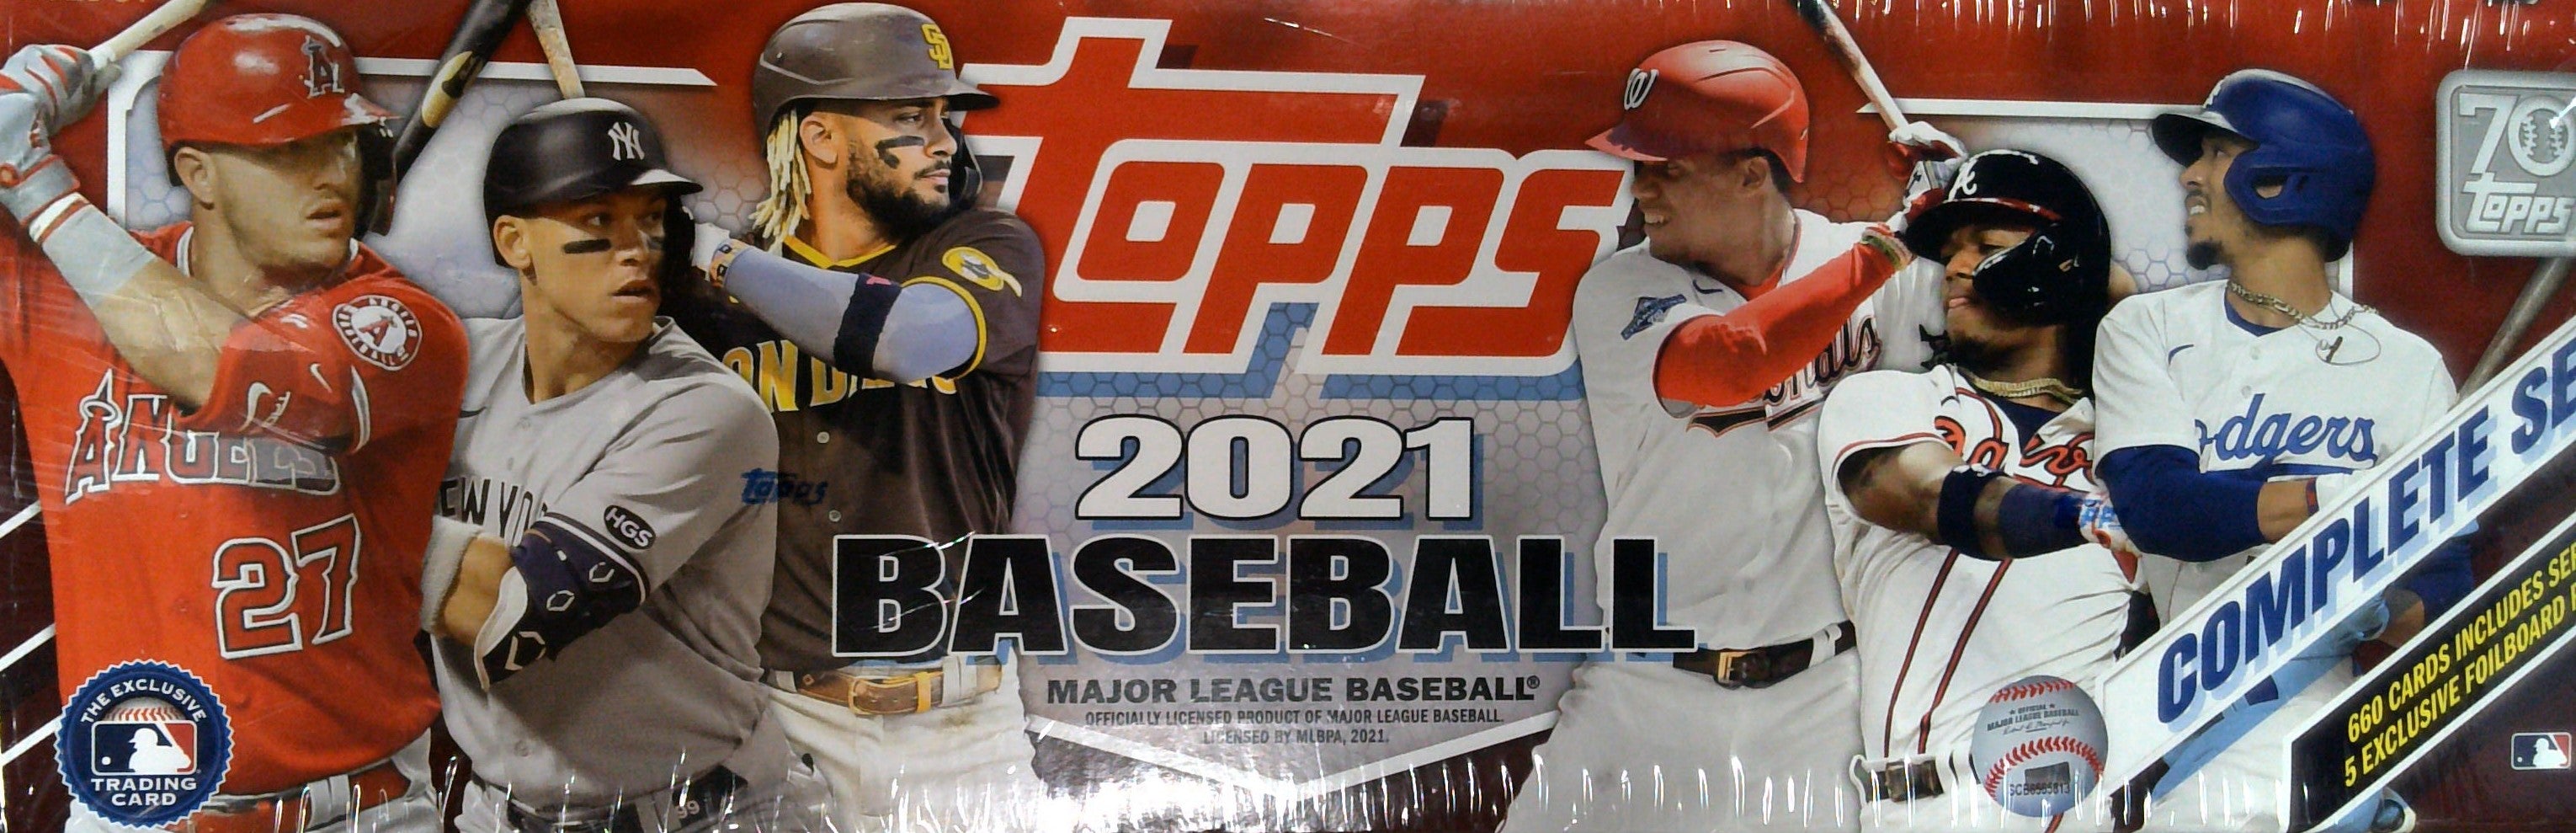 Topps 2021 Baseball Complete 660 Card Factory Set + 5 Card Parallel Pack